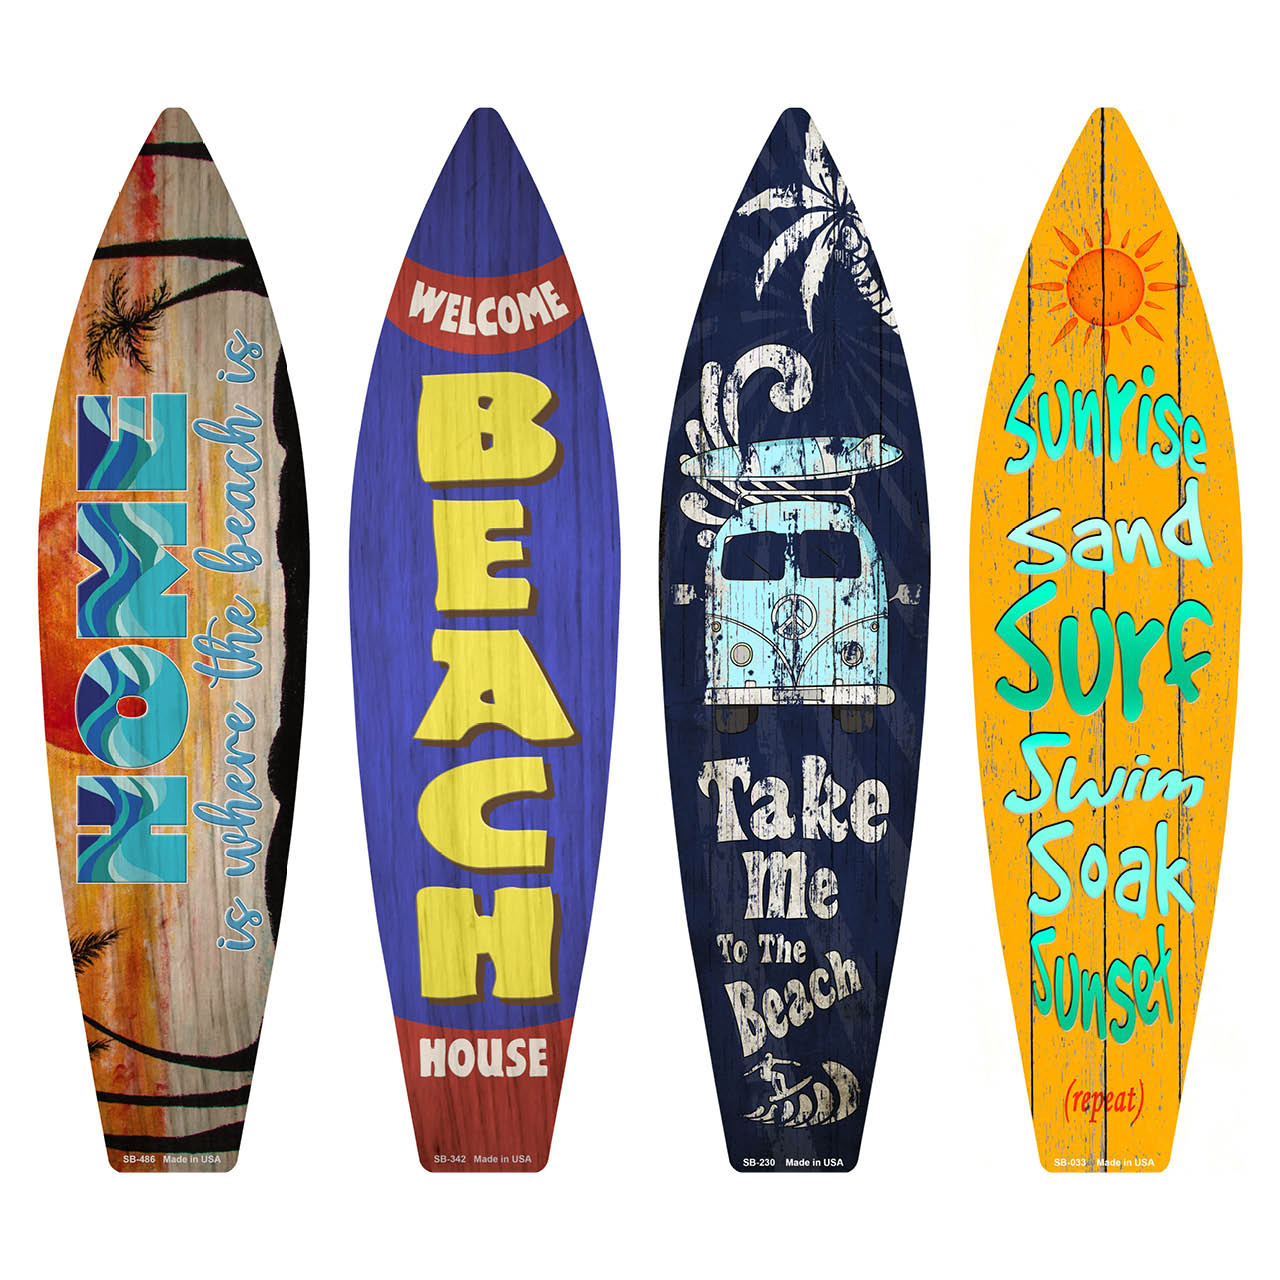 Busy at the Beach Surfboard Set Wholesale Novelty Metal Set of 4 SB-Pack-04